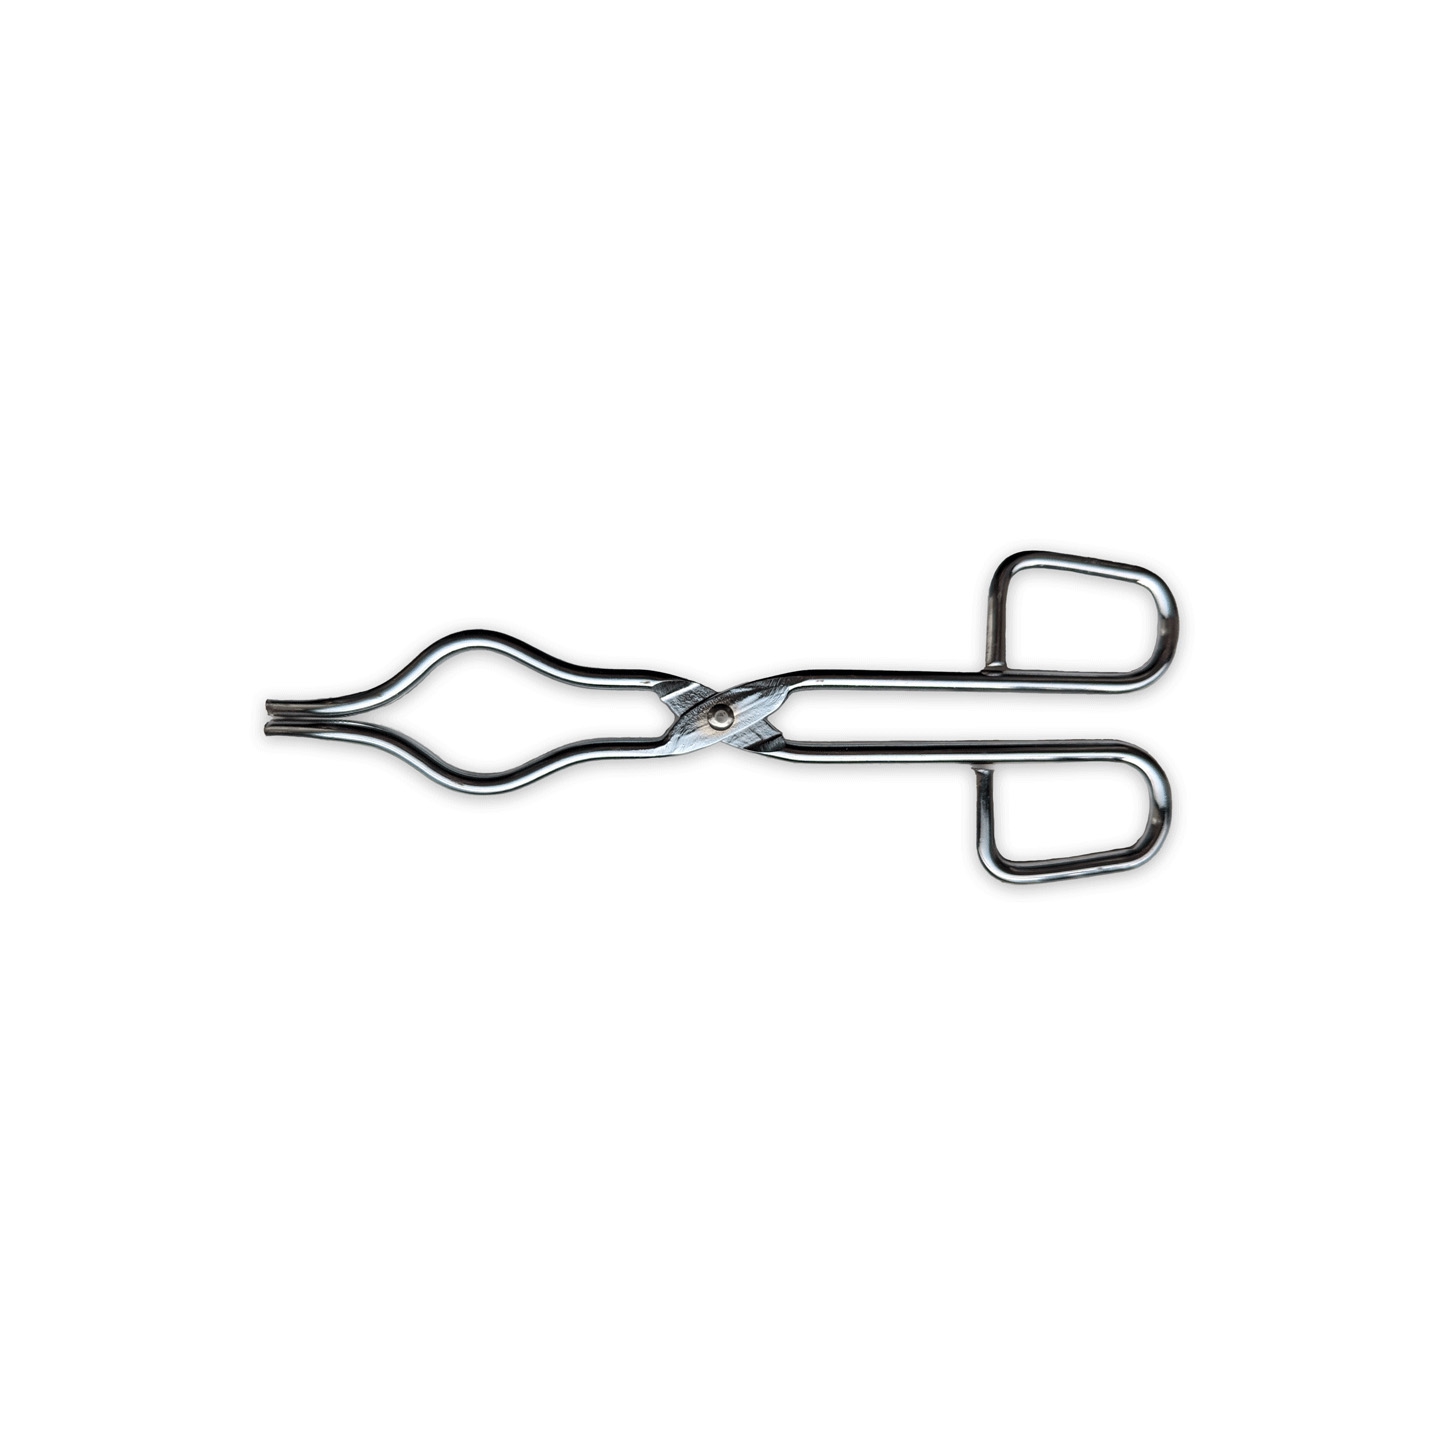 Crucible Tong, Plated Steel, Length 150mm, Bow Curved Tips, Flat Hinge